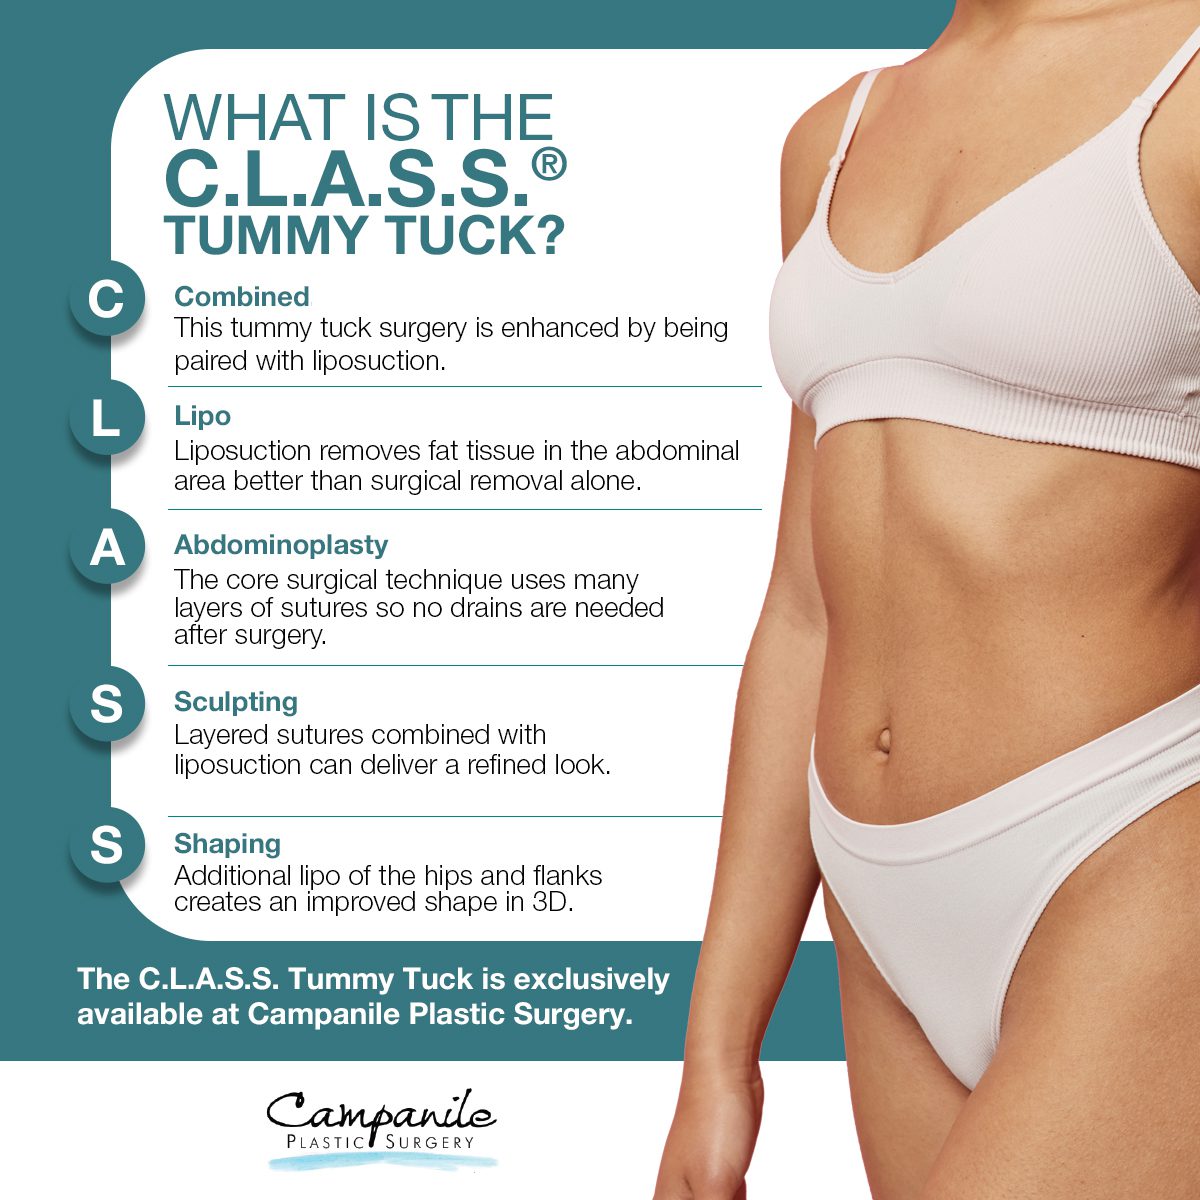 What Is the C.L.A.S.S.™ Tummy Tuck?